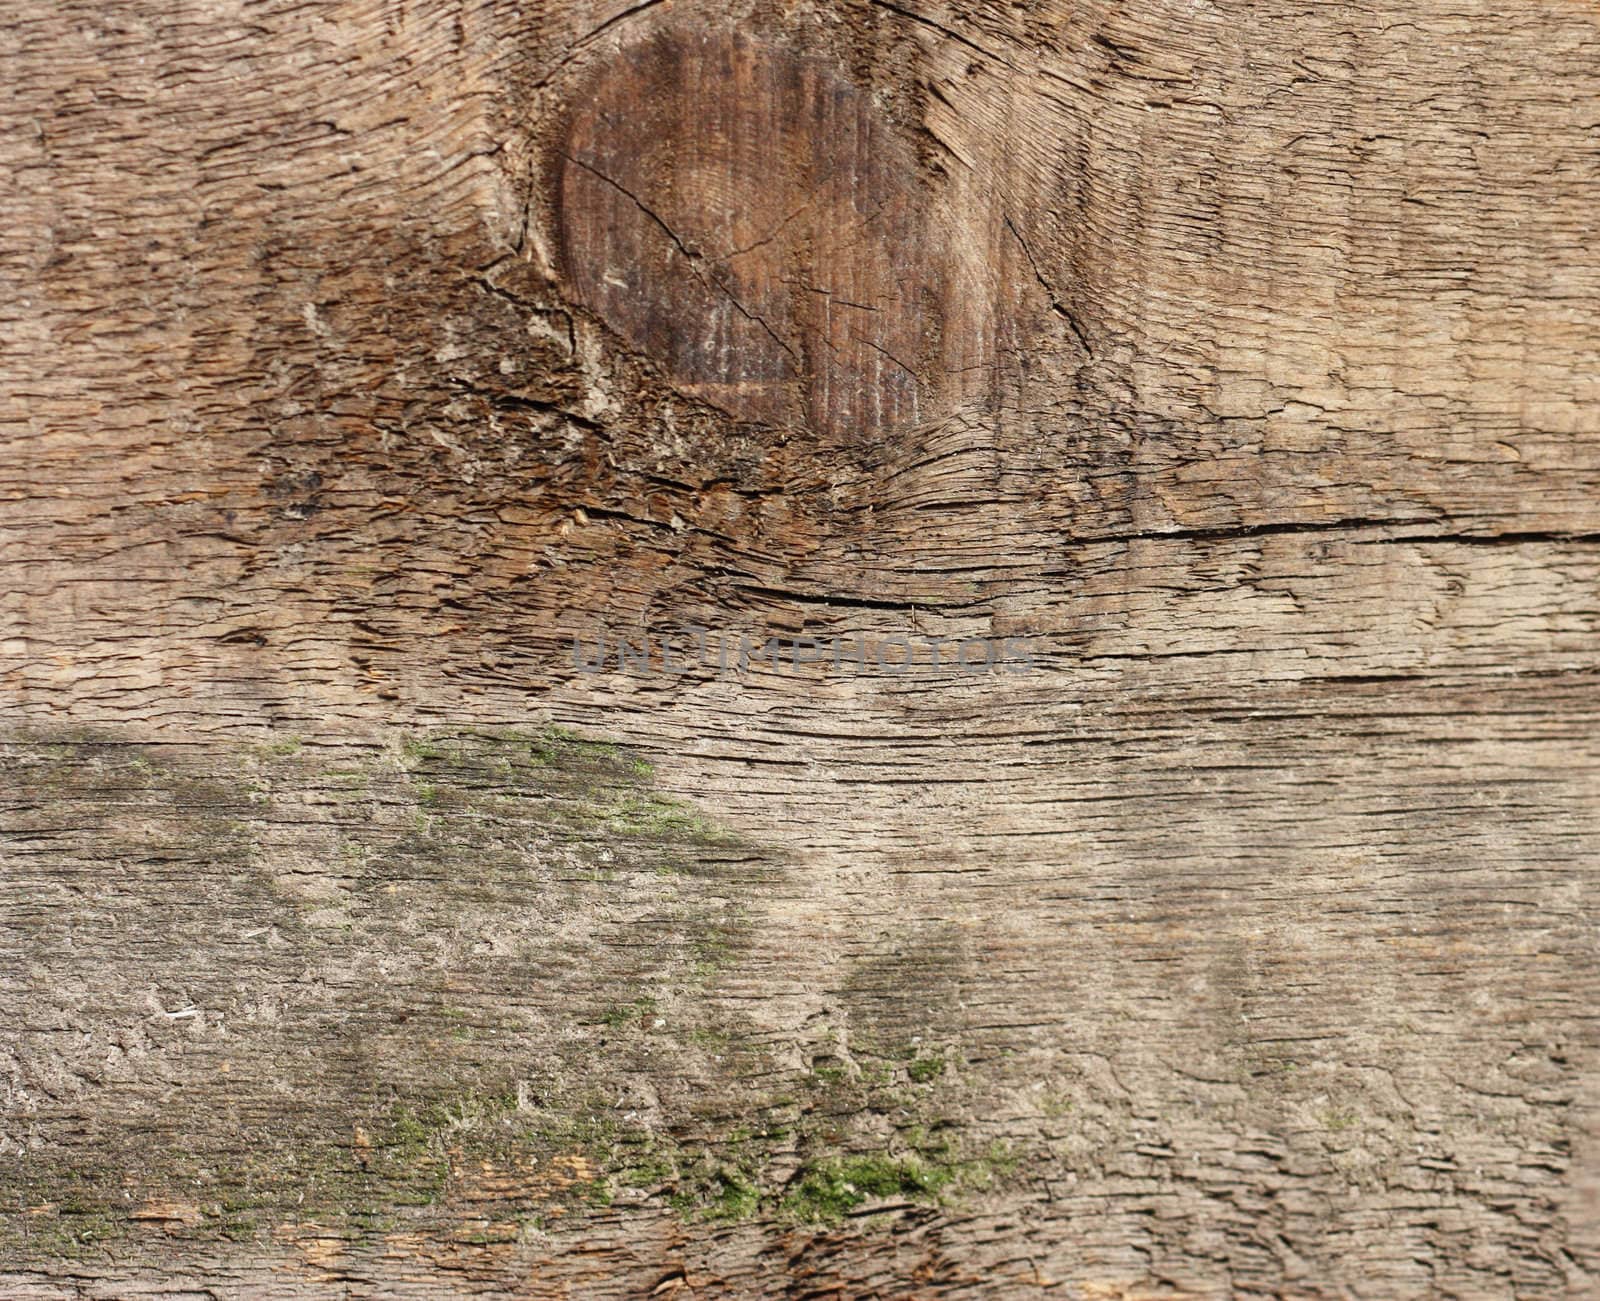 Wooden texture - can be used as a background  by schankz